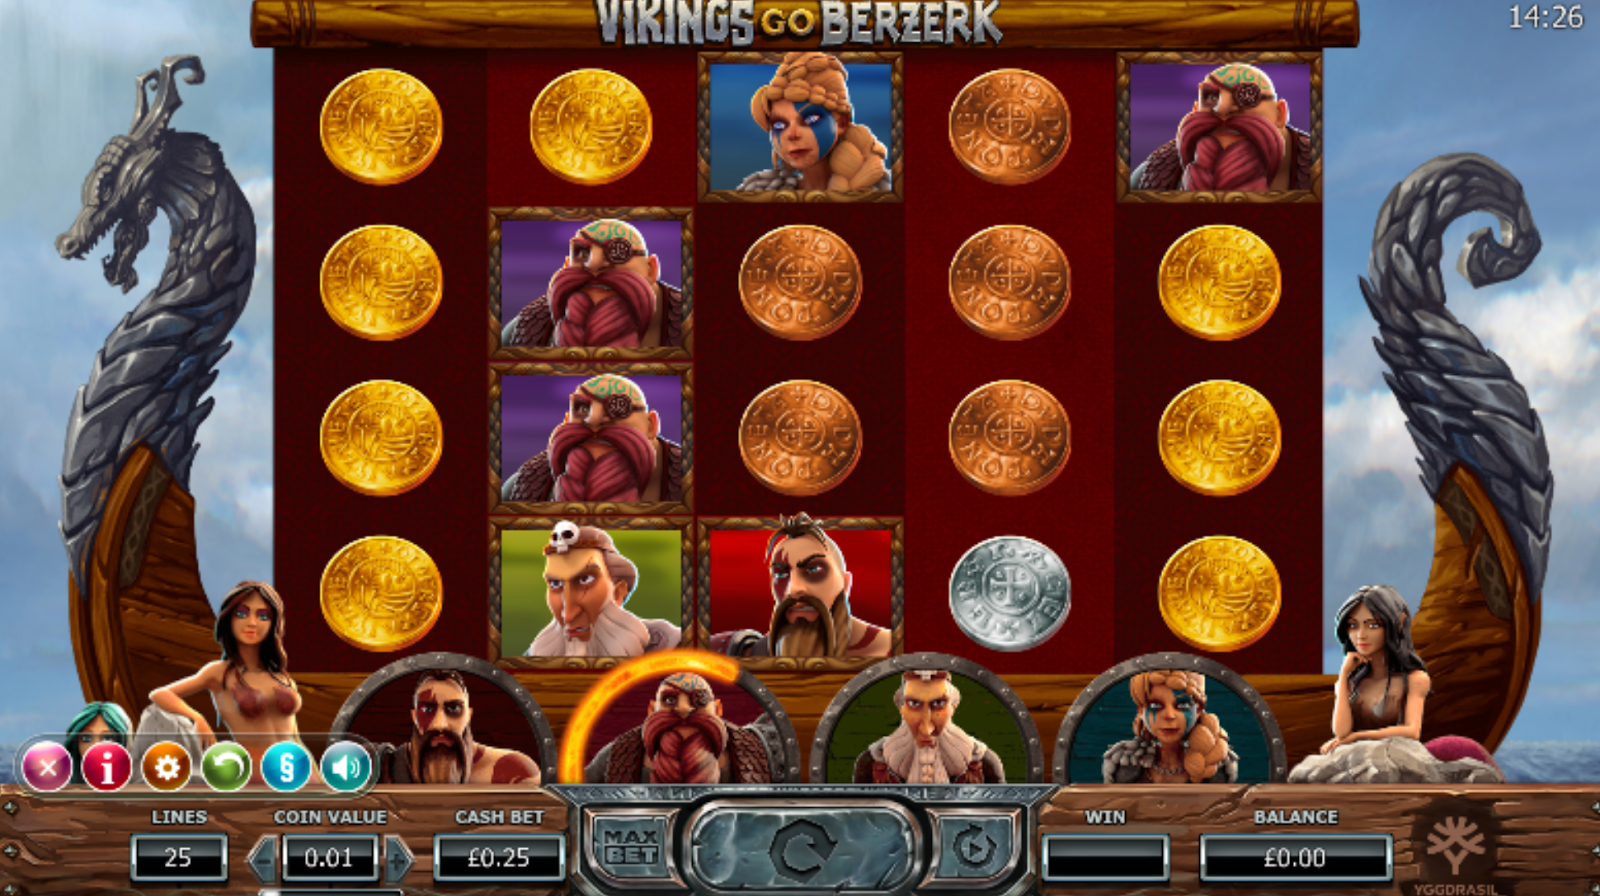 Vikings Go Berzerk is one of the great slot games you can play at Casoola Casino